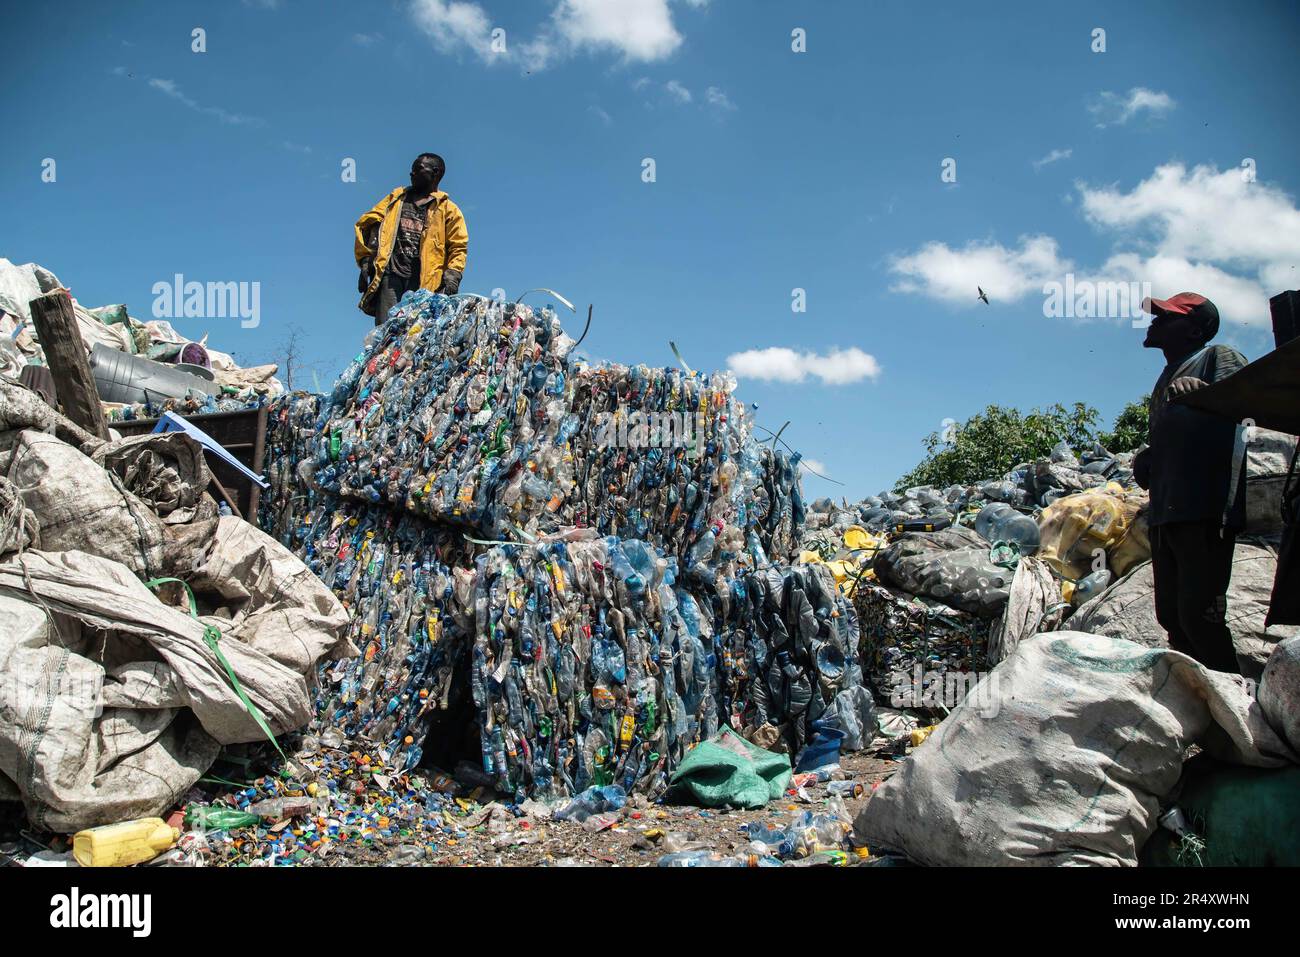 A worker arranges bales of plastic at a recycling plant in Nakuru. Negotiators have gathered in Paris, France for the second round of deliberations to develop a global treaty aimed at tackling the escalating issue of plastic pollution. According to a recent report by the United Nations Environment Programme (UNEP), countries have the potential to reduce plastic pollution by 80% by 2040 by eliminating unnecessary plastics, implementing recycling and reuse strategies, introducing deposit return schemes, and substituting plastic with sustainable alternative materials. Stock Photo